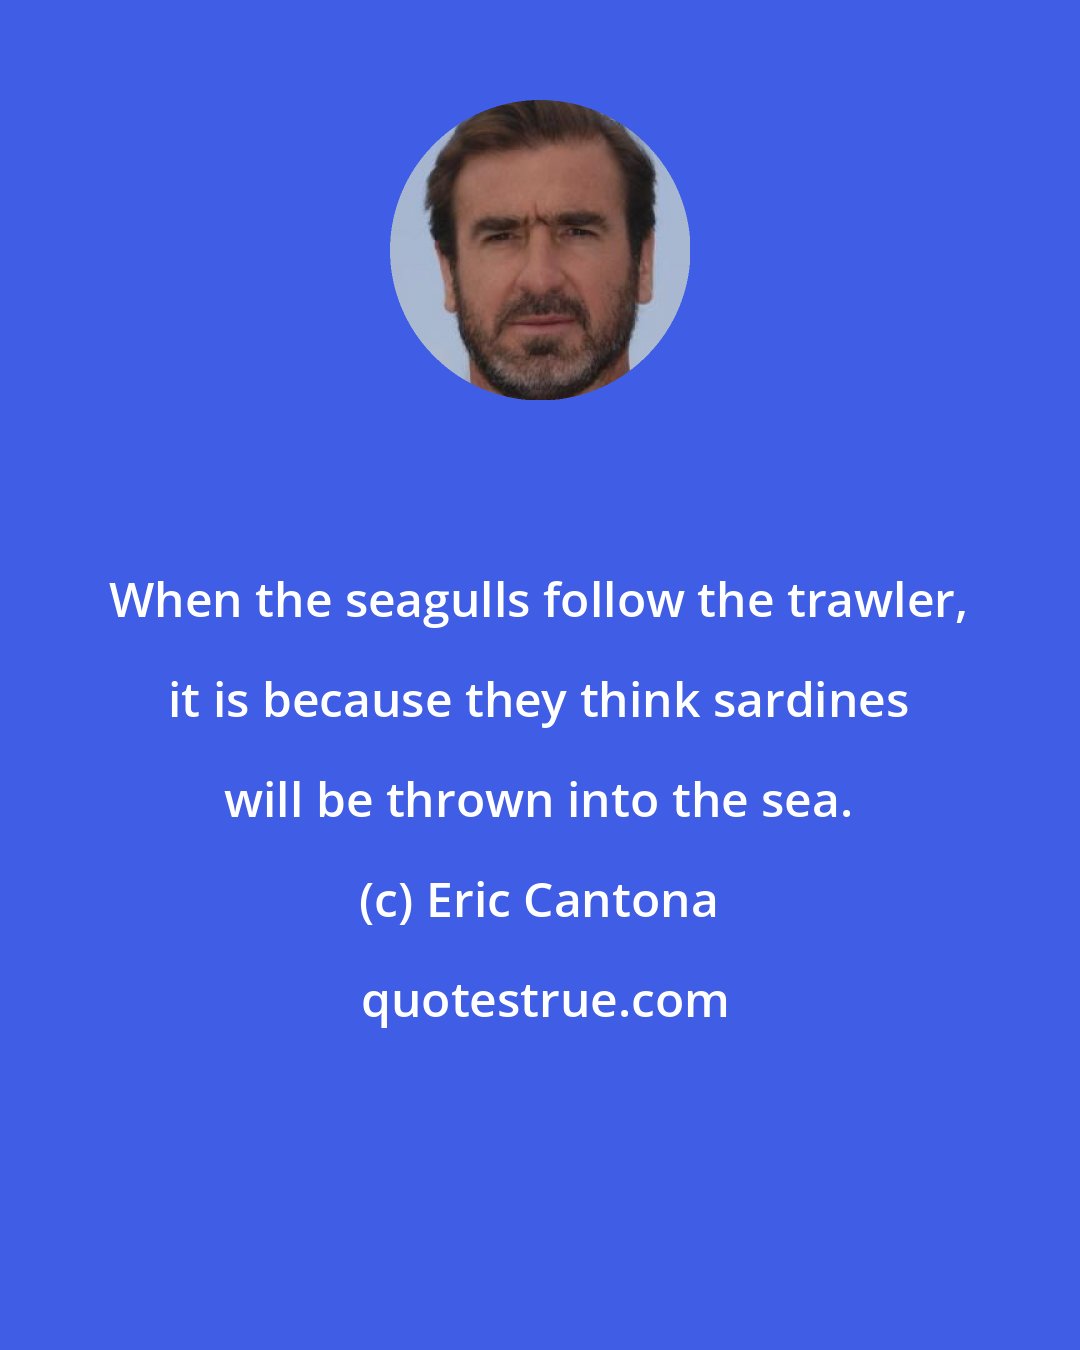 Eric Cantona: When the seagulls follow the trawler, it is because they think sardines will be thrown into the sea.